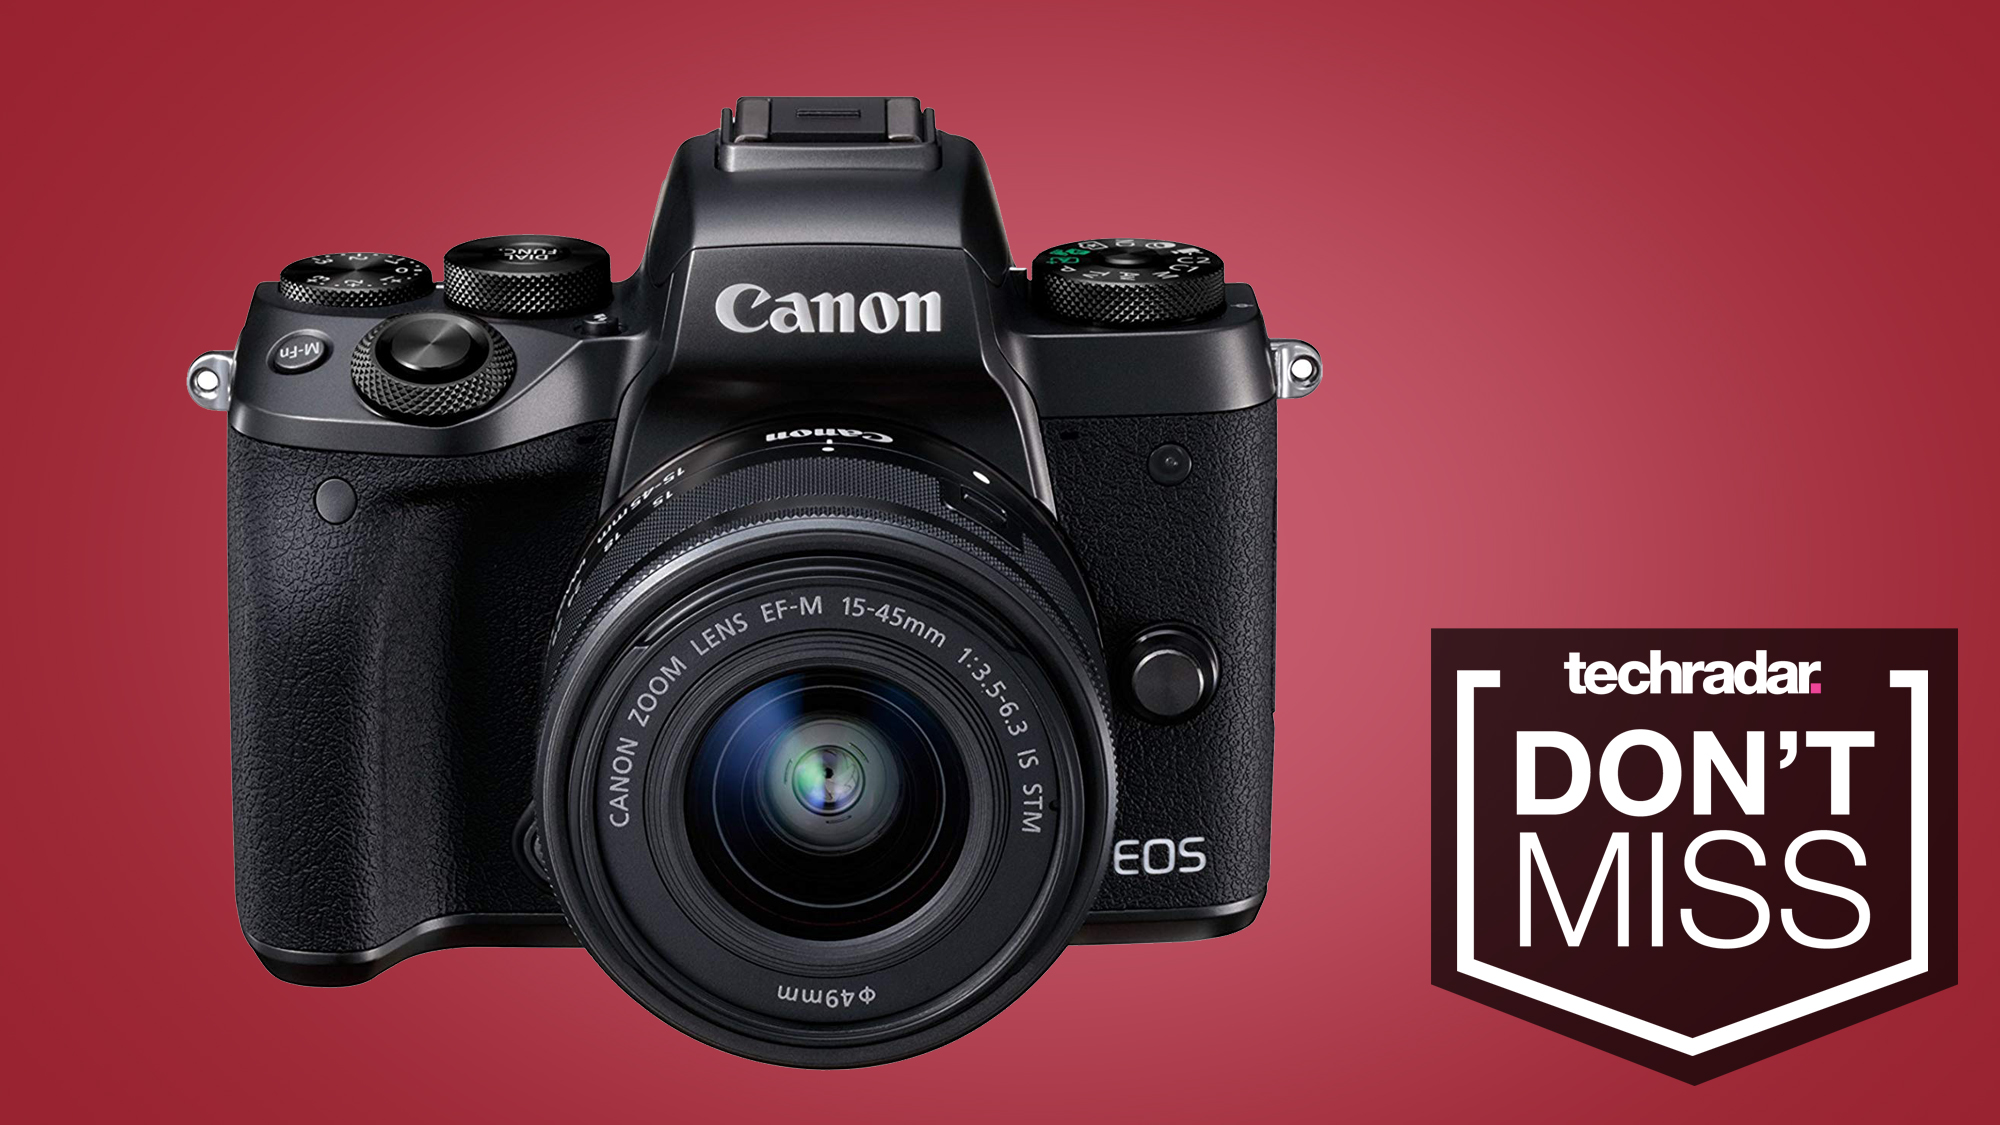 Should I Get the Canon EOS M5 or the EOS M50 Mirrorless Camera?